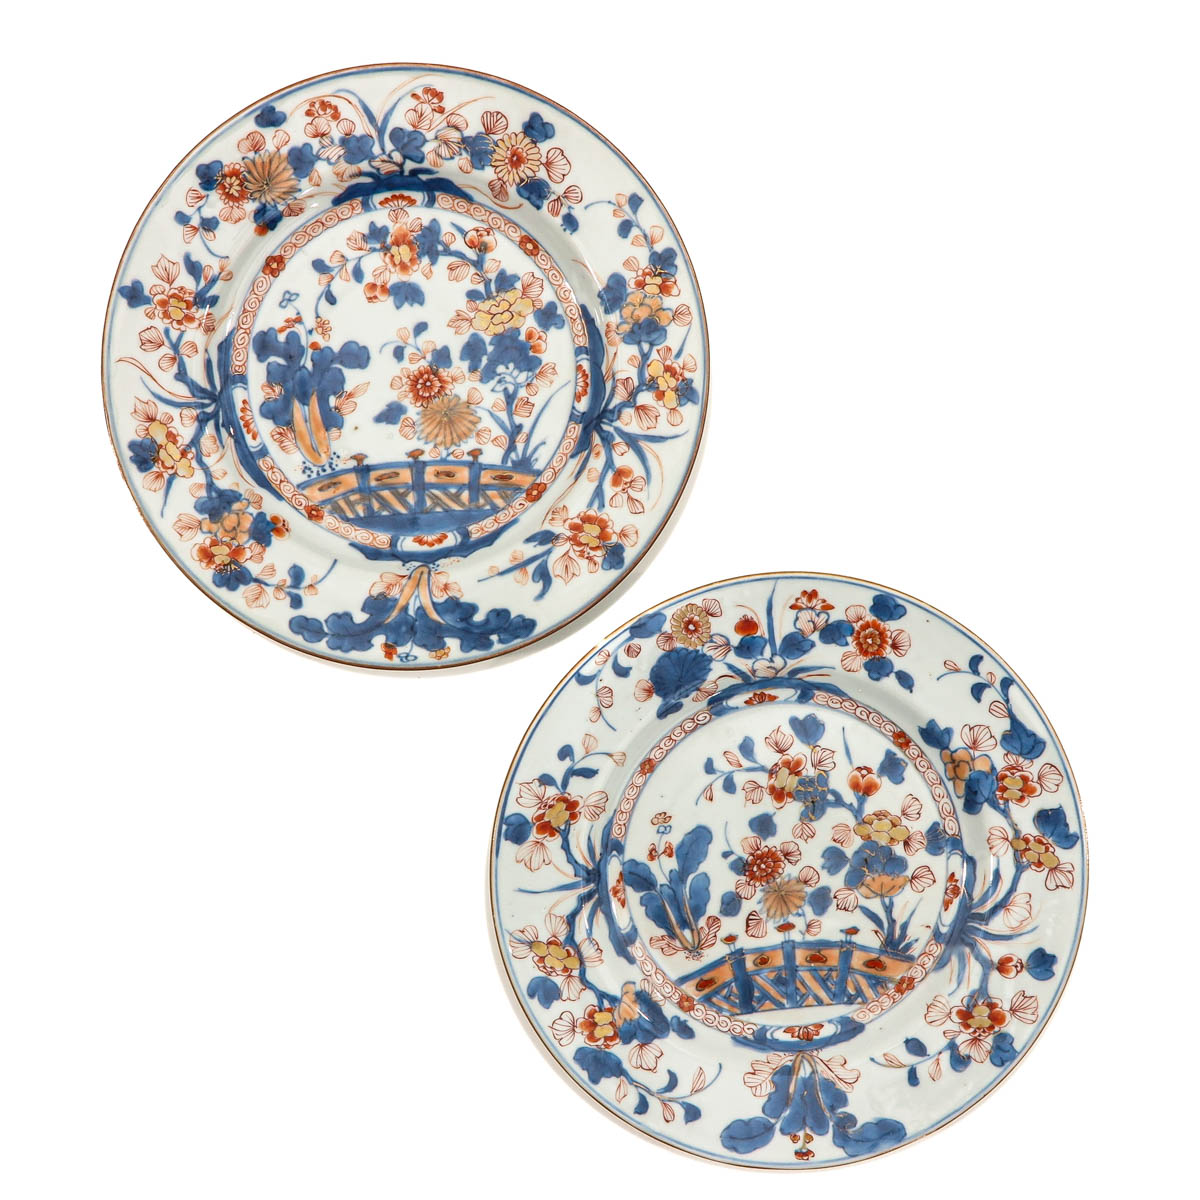 A Collection of 4 Imari Plates - Image 3 of 10